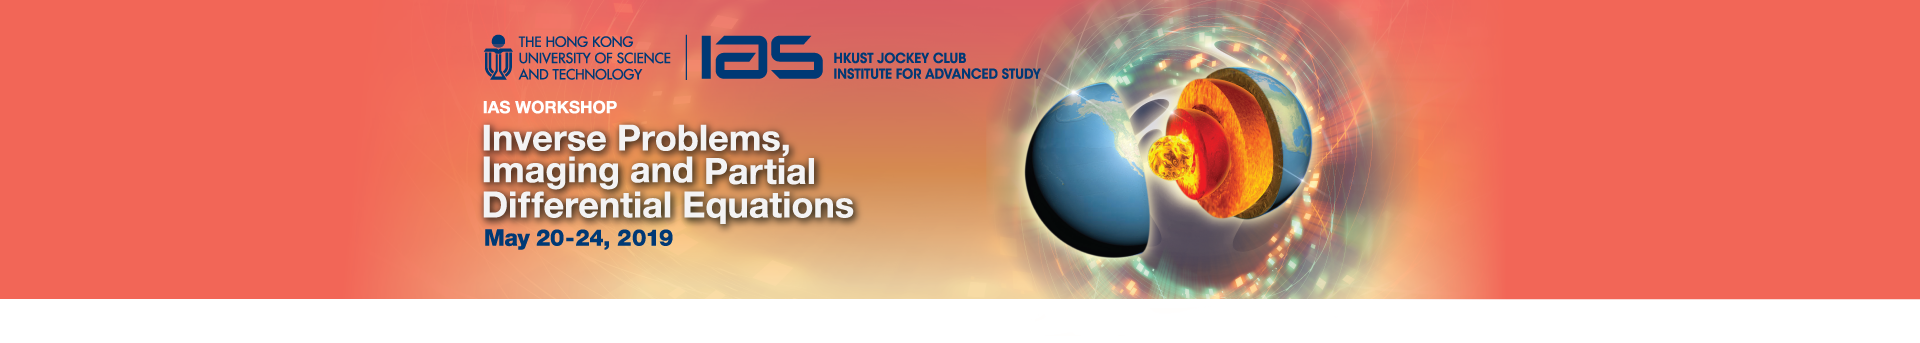 IAS Workshop on Inverse Problems, Imaging and Partial Differential Equations